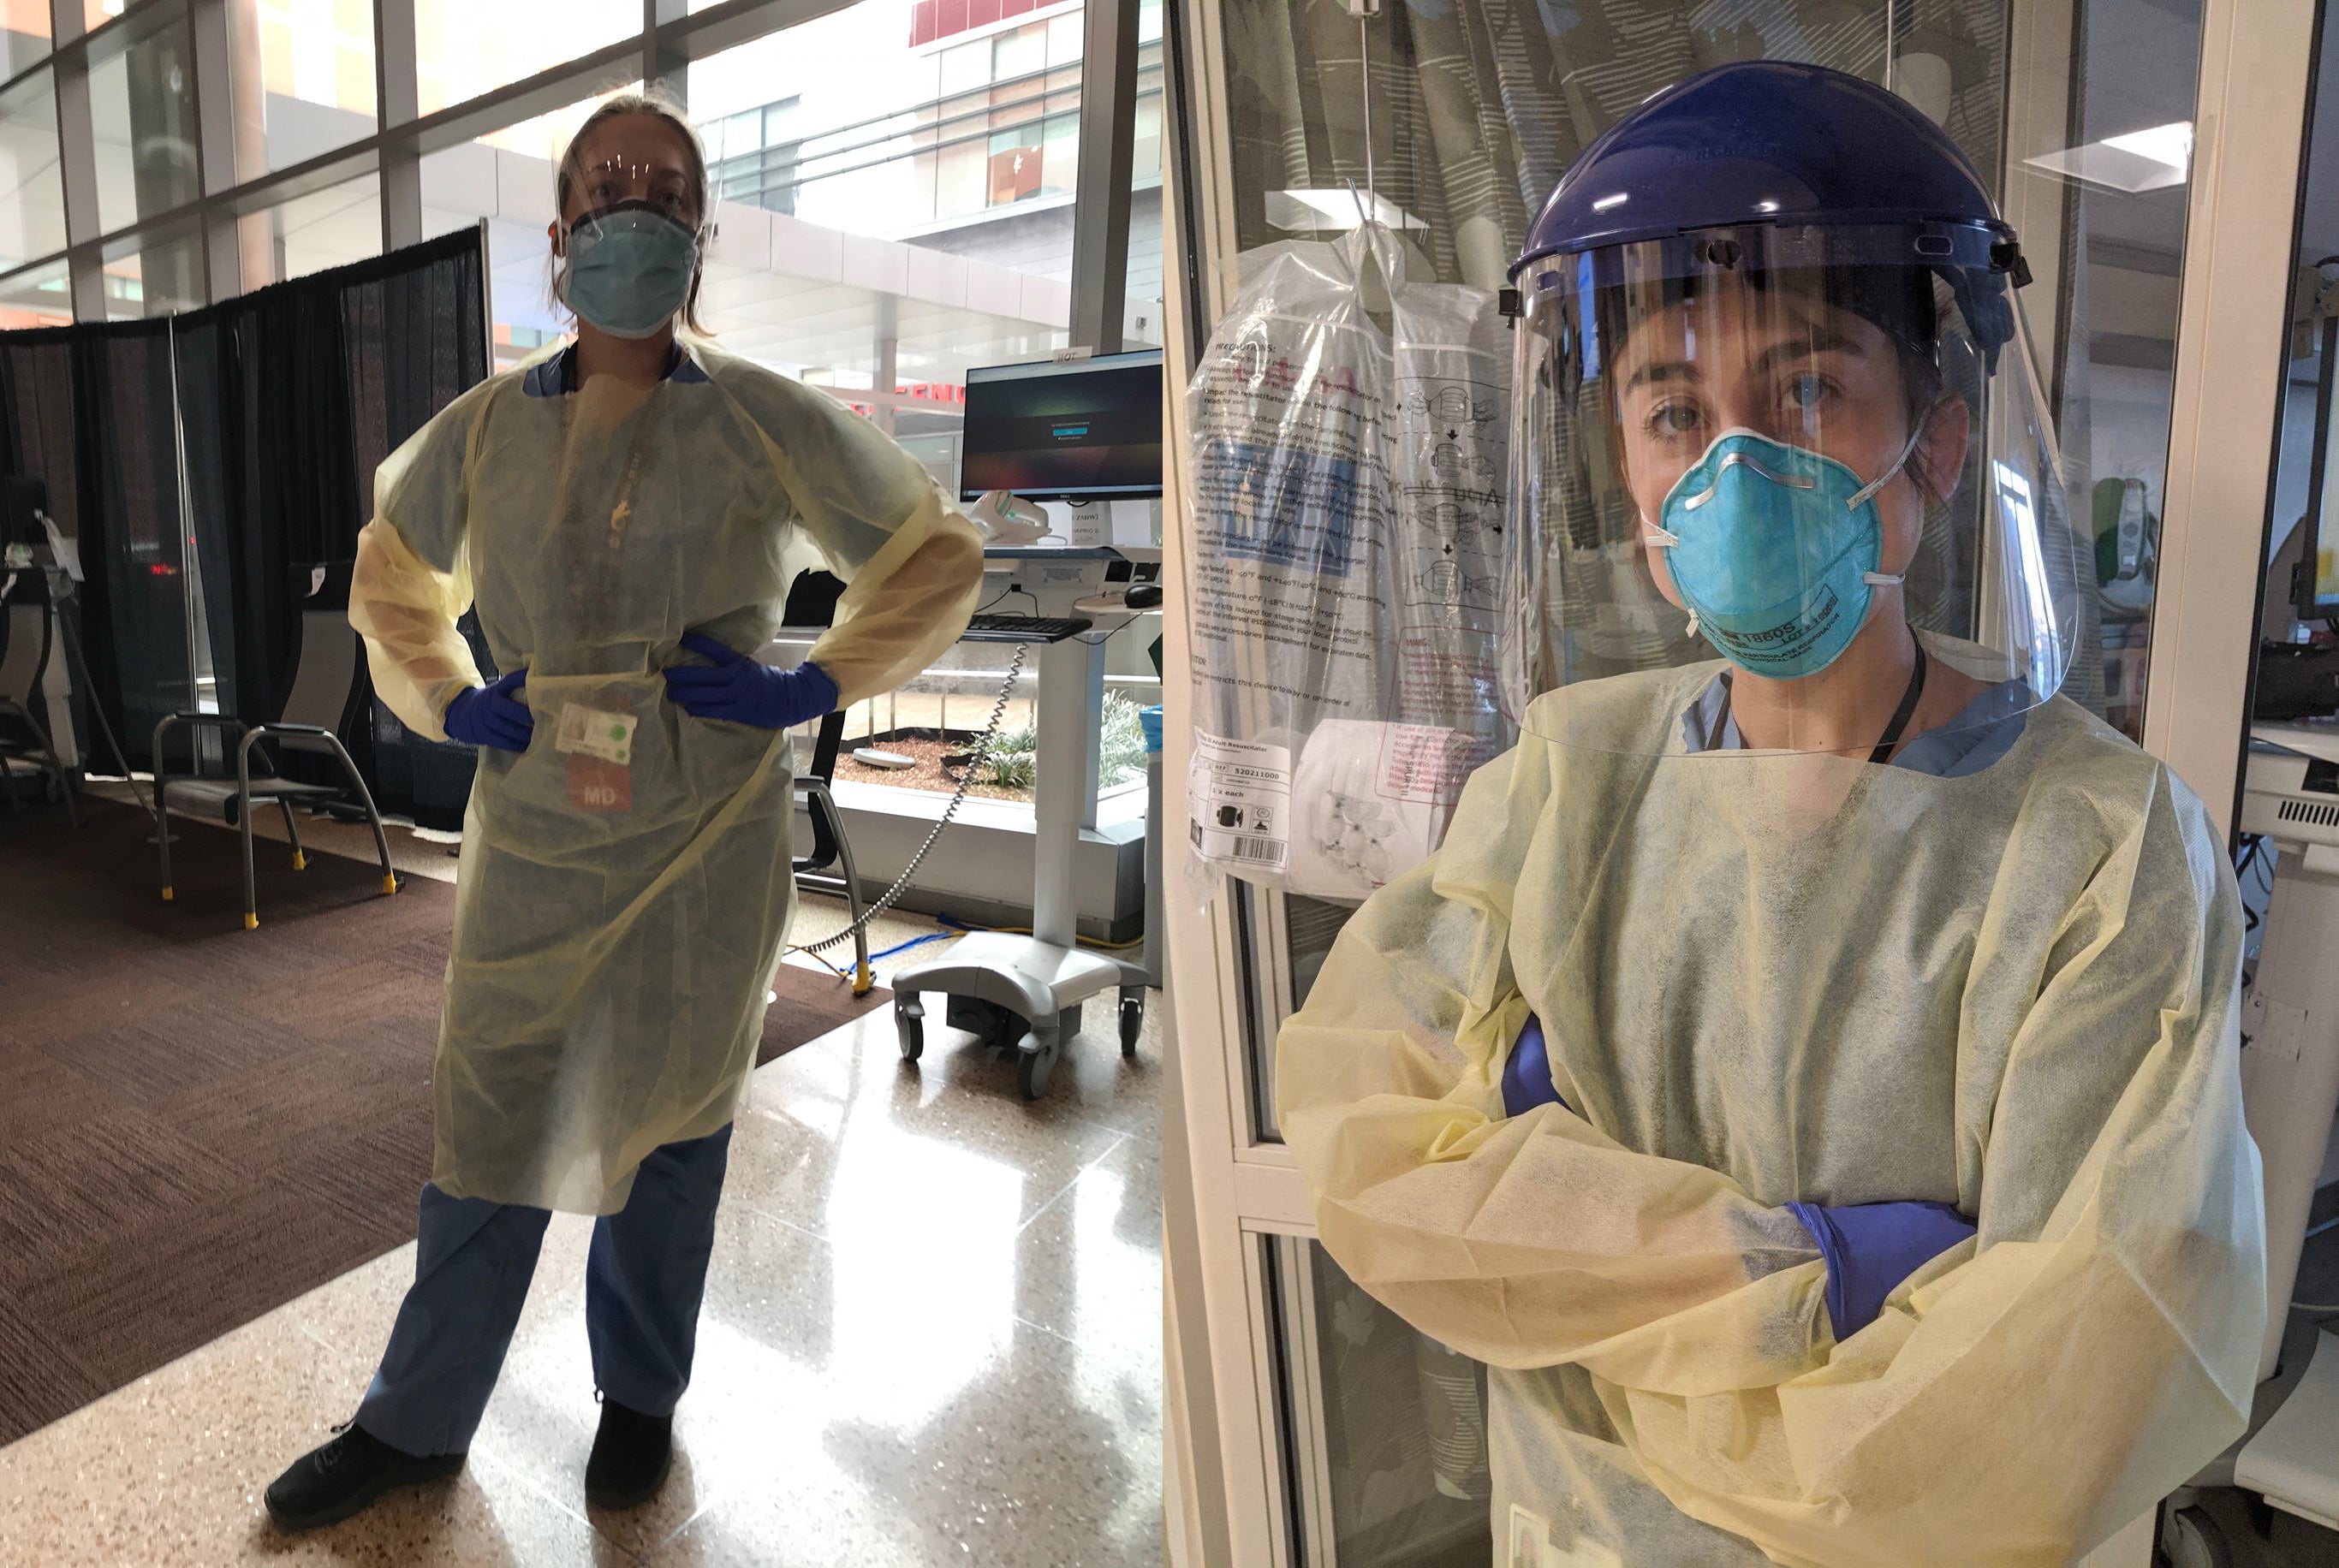 Physicians at Boston Medical Center wear full PPE when caring for COVID-19 patients.